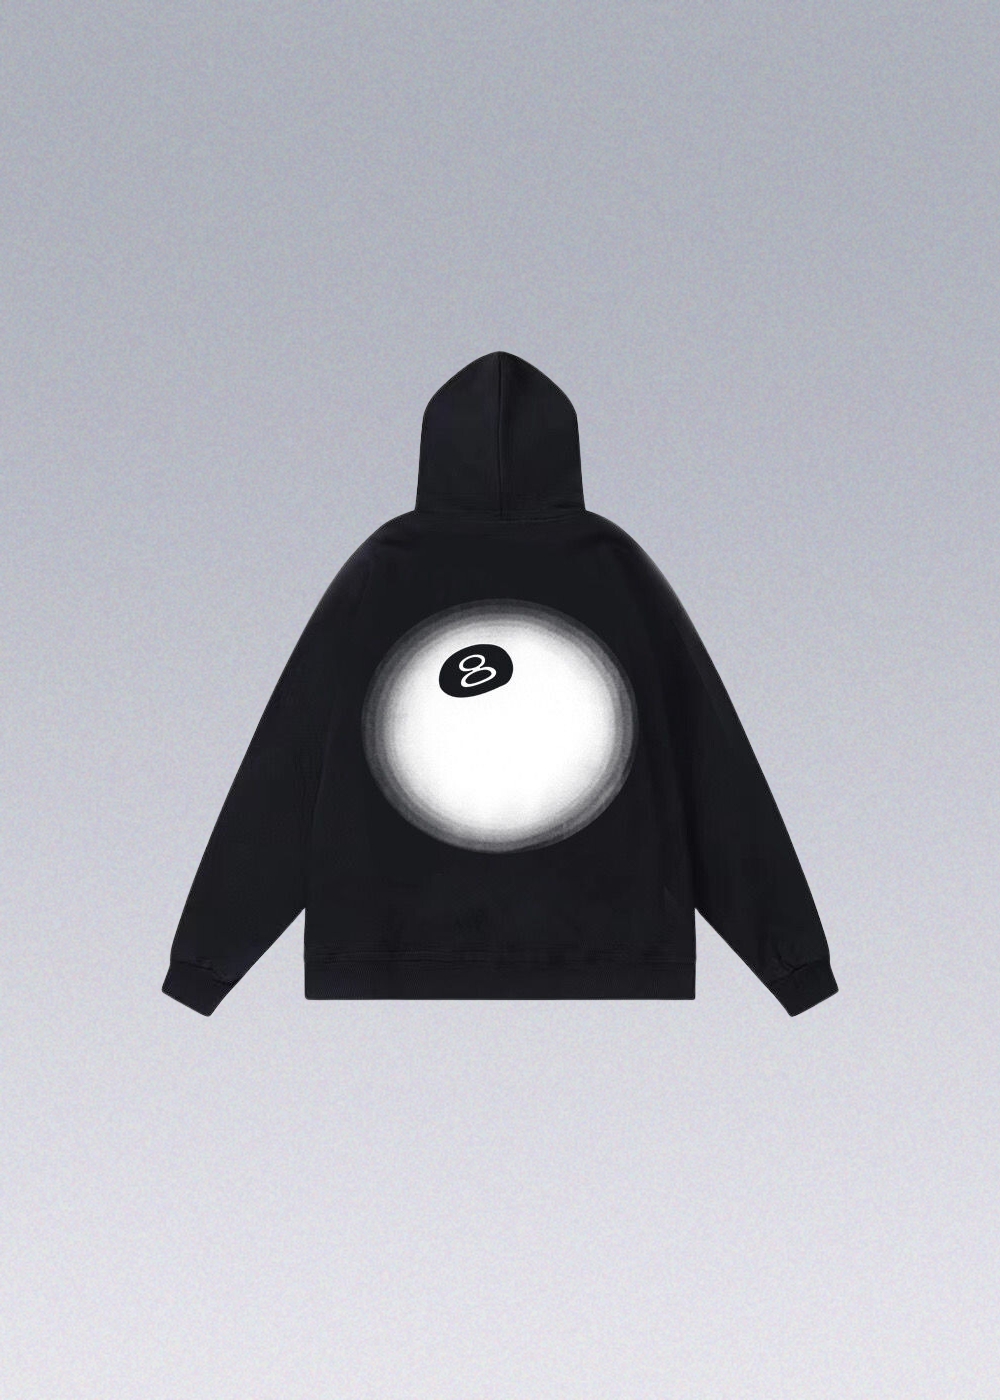 Stussy Hoodie Collection